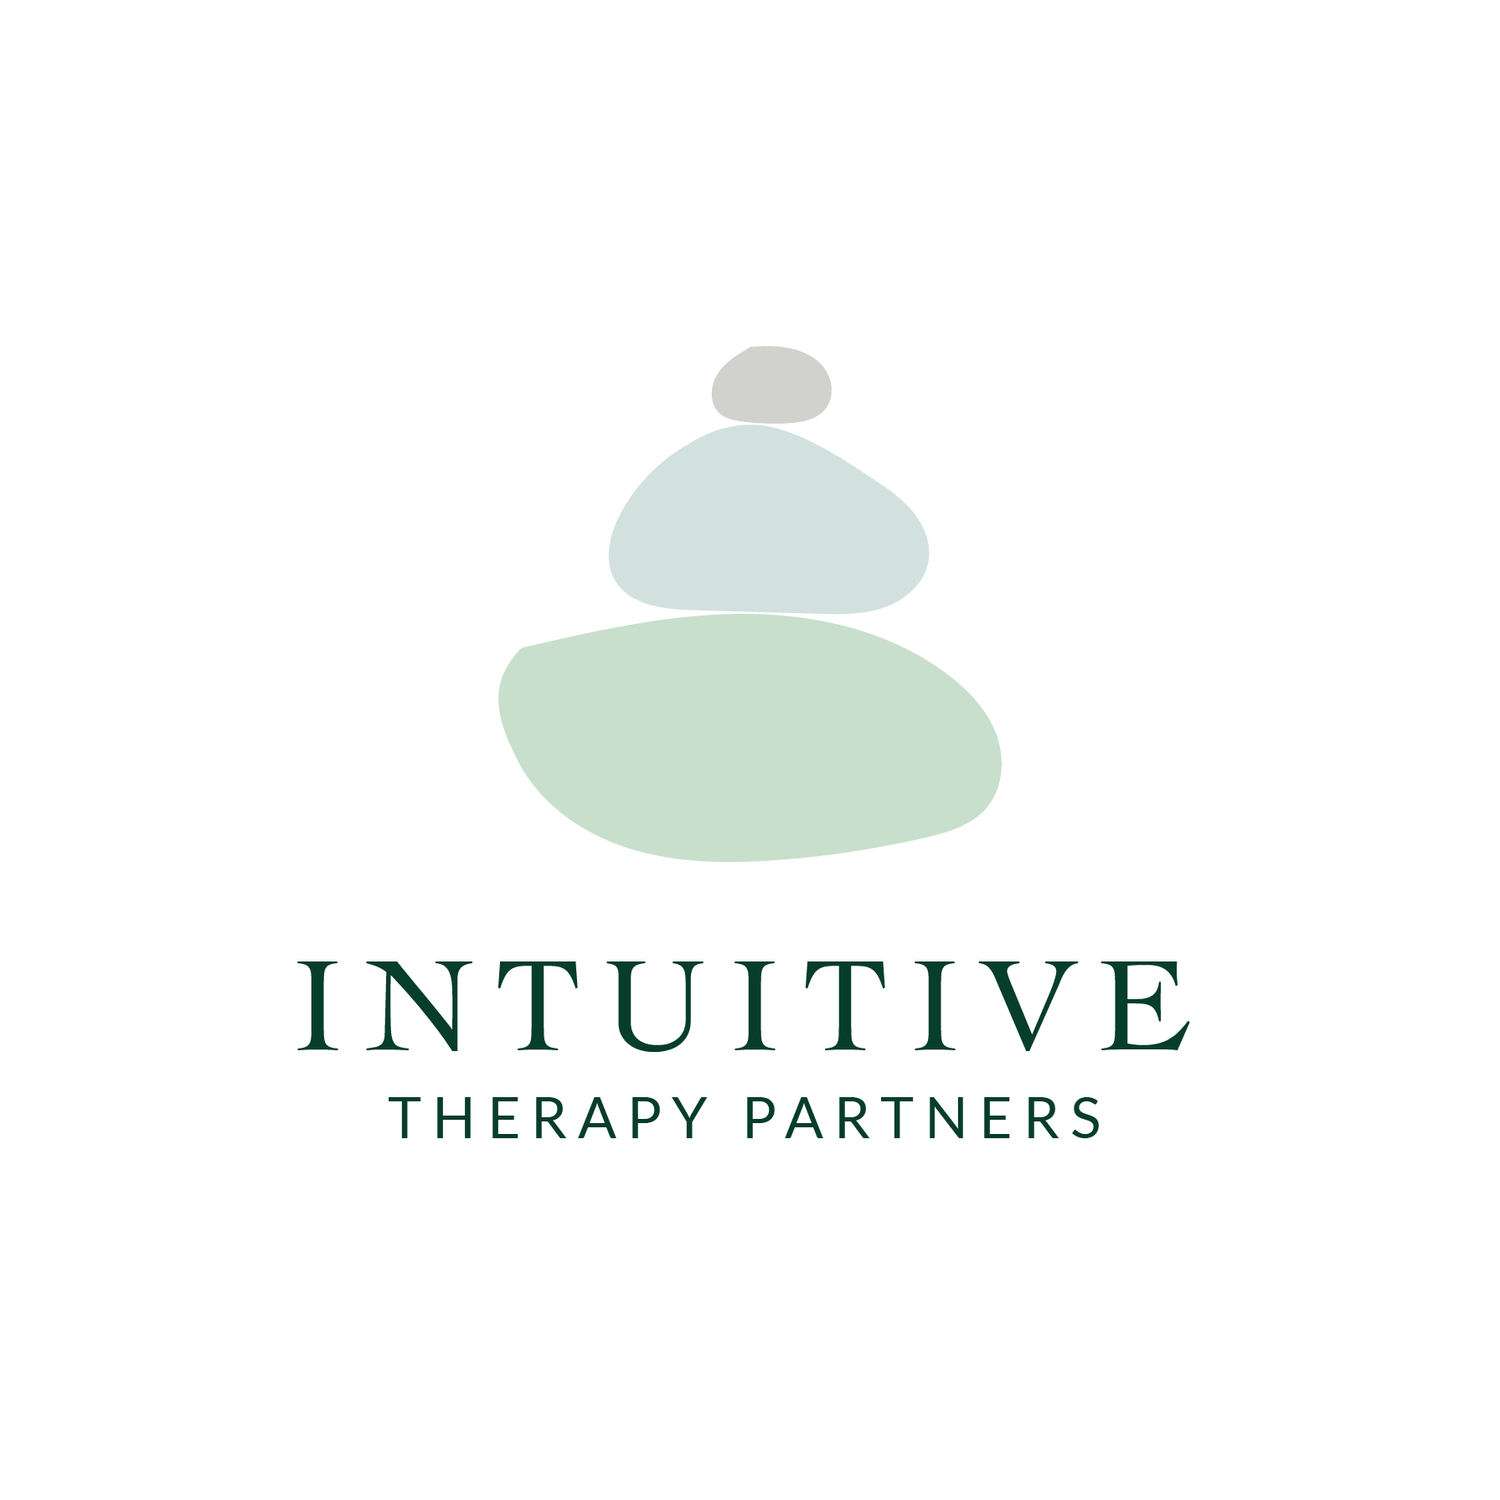 Intuitive Therapy Partners